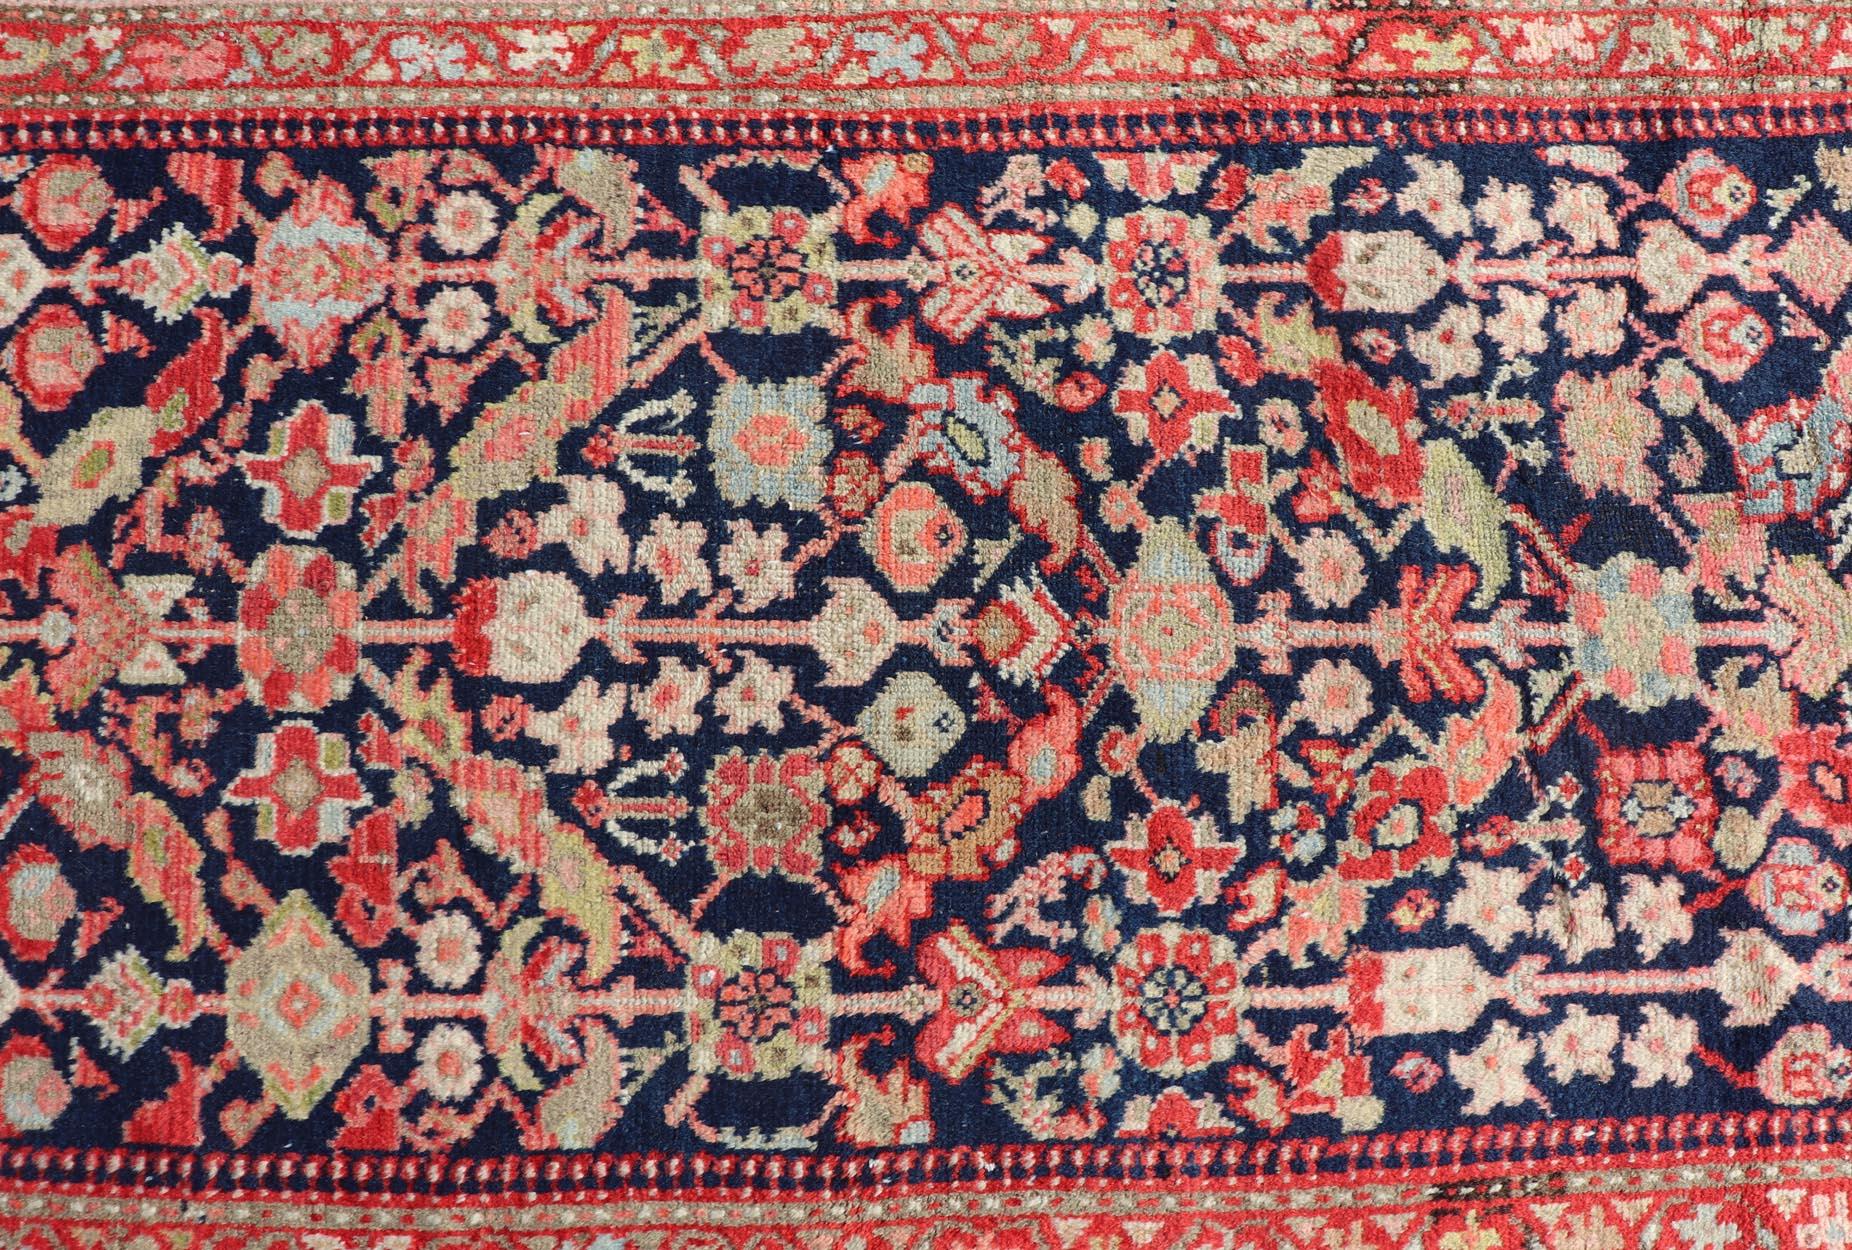 Antique Persian Gallery Hamadan Runner in Blue Background with Multi Colors For Sale 3